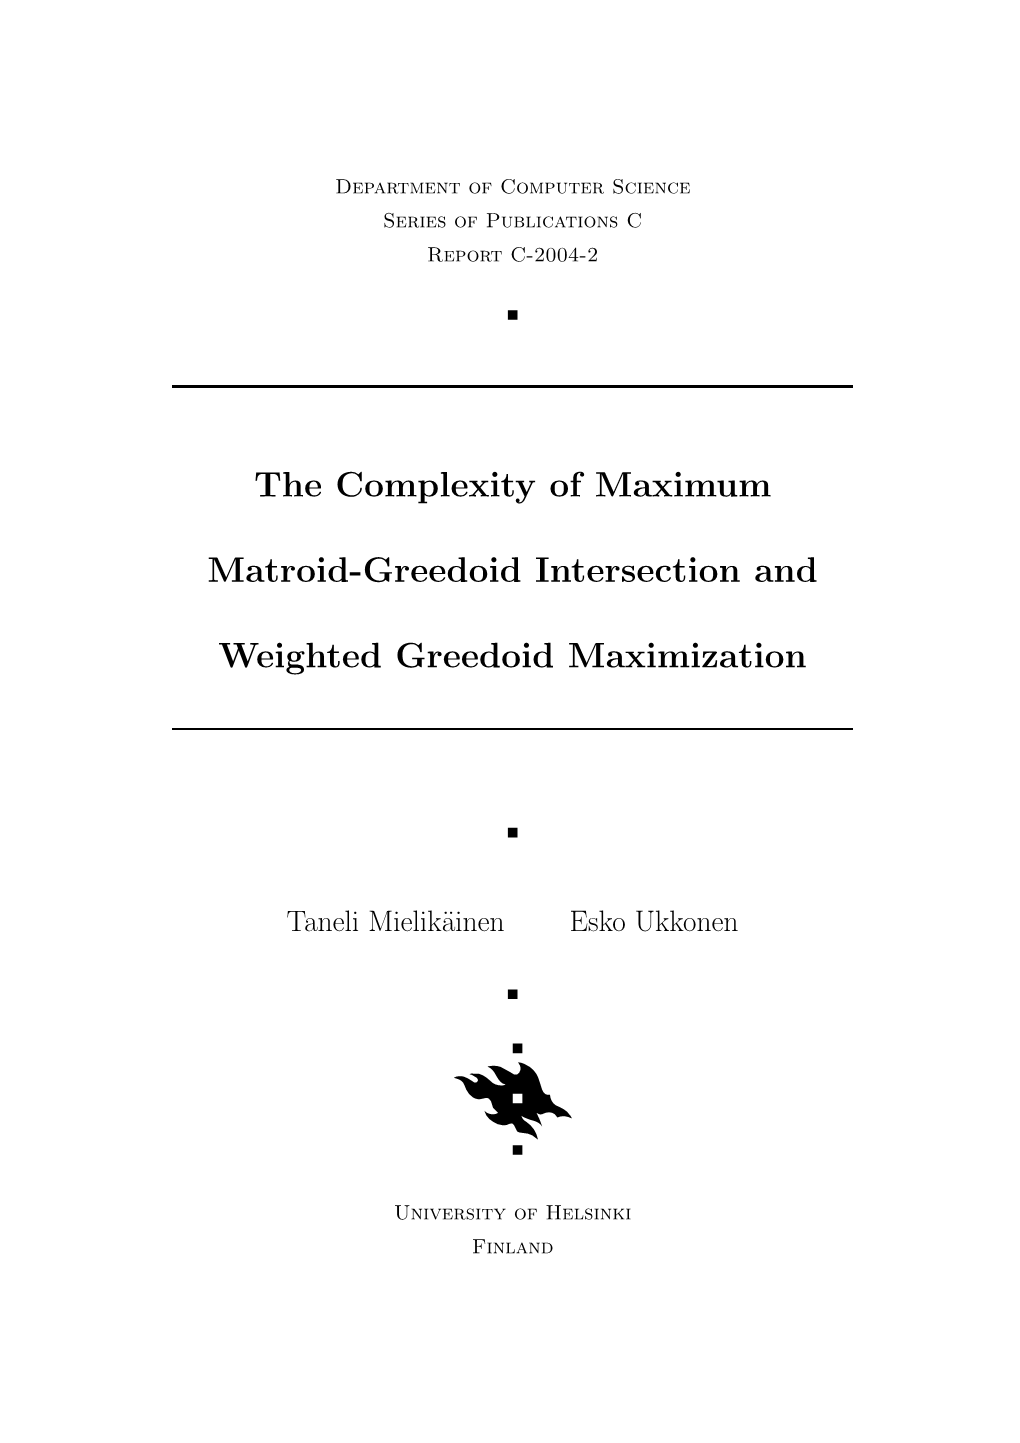 The Complexity of Maximum Matroid-Greedoid Intersection And